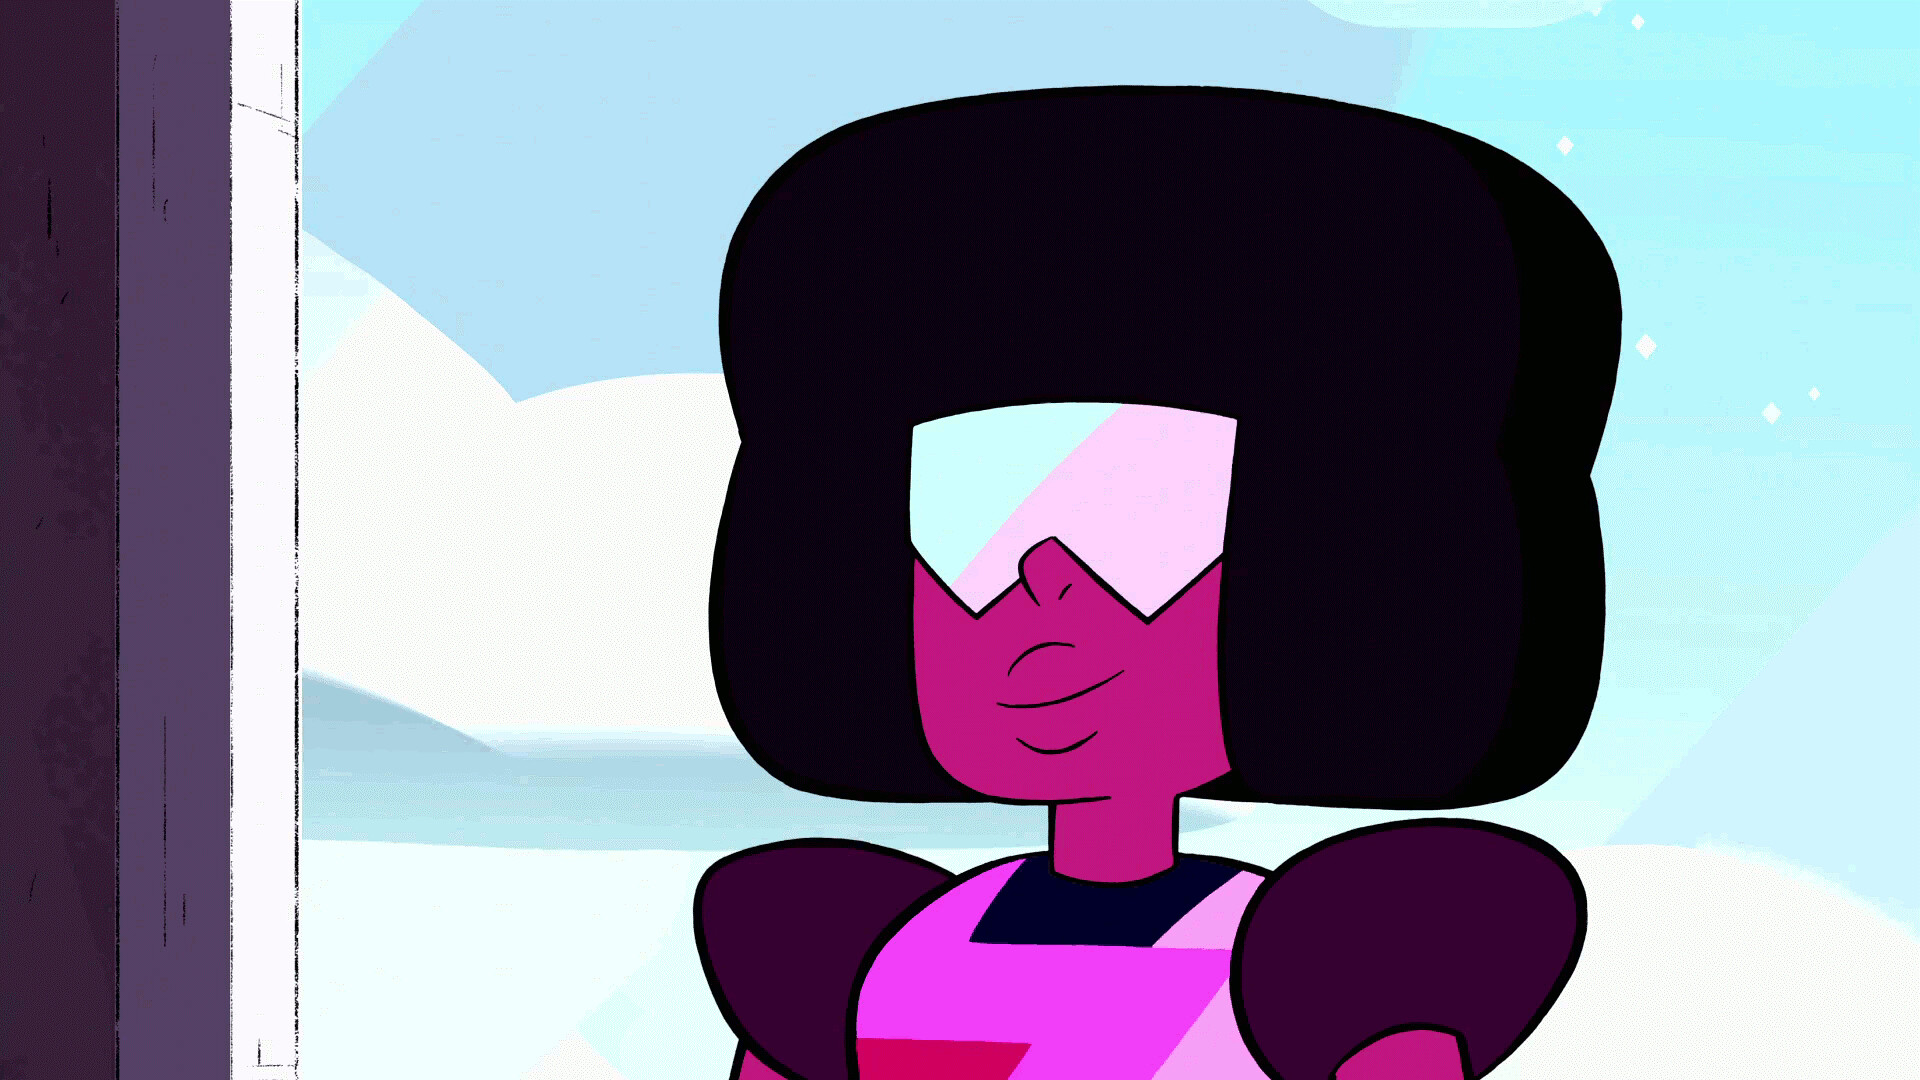 Garnet (Steven Universe): A fusion - two Gems combining personalities and appearances as one shared holographic body. 1920x1080 Full HD Wallpaper.